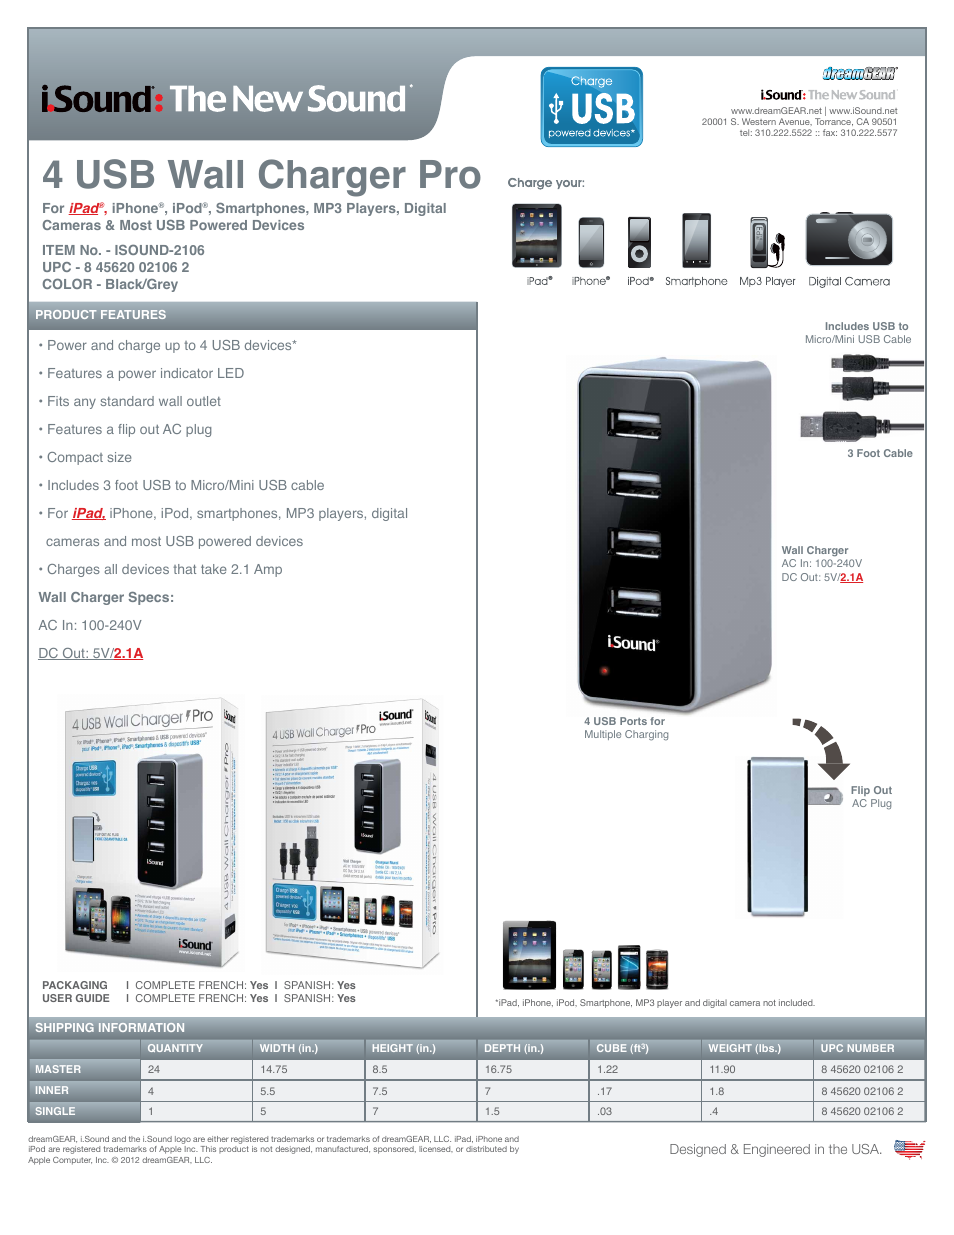 4 USB Wall Charger Pro 2106 - Sell Sheet